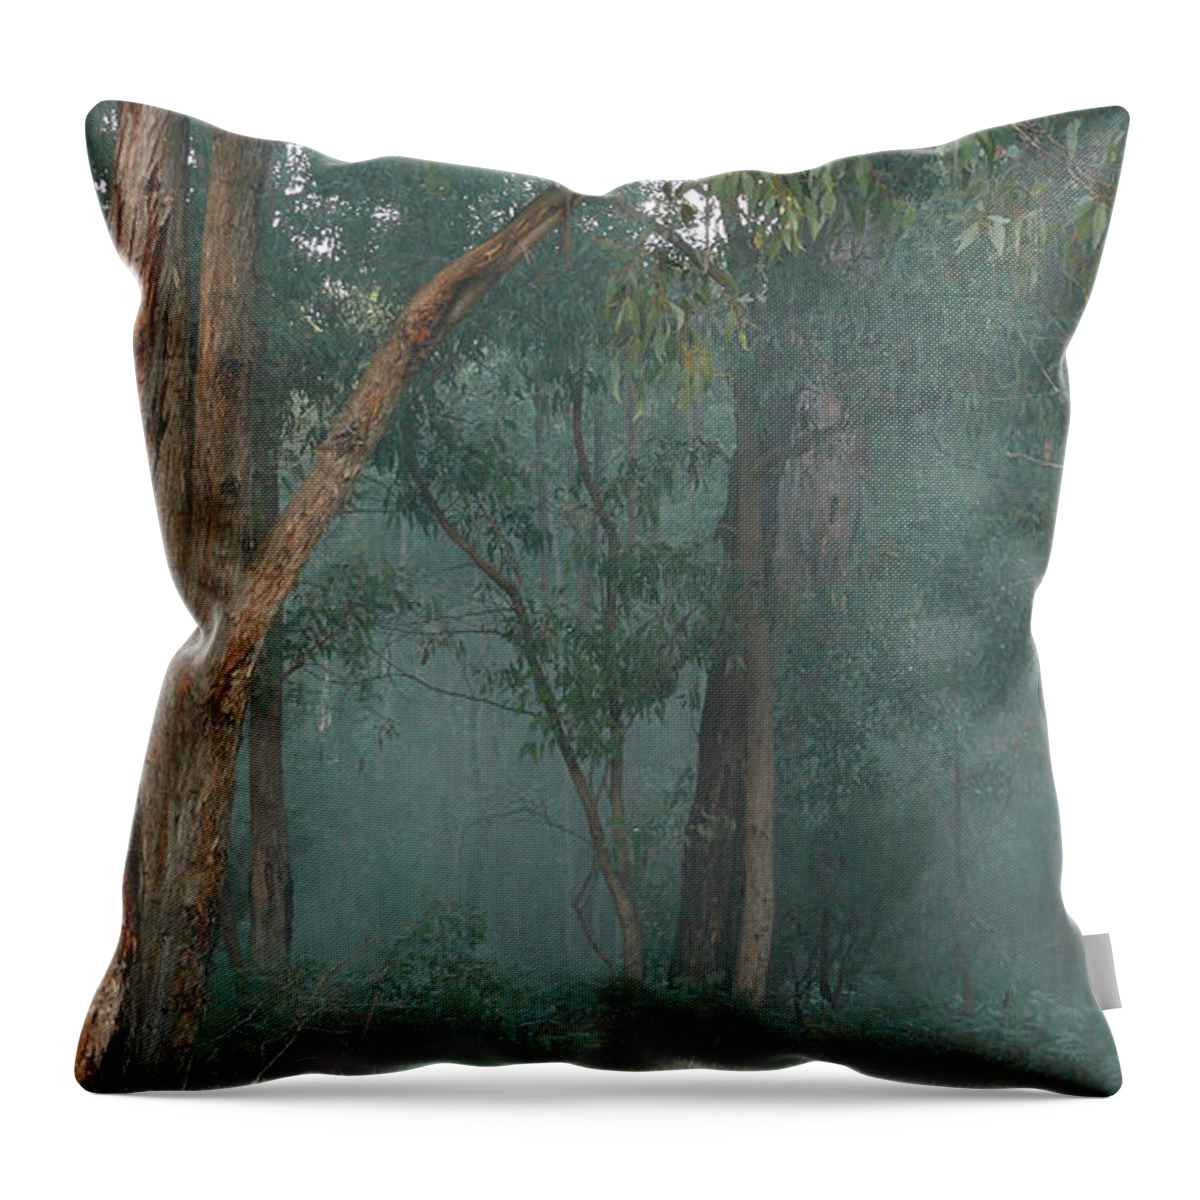 Australia Throw Pillow featuring the photograph Australian Morning by Evelyn Tambour